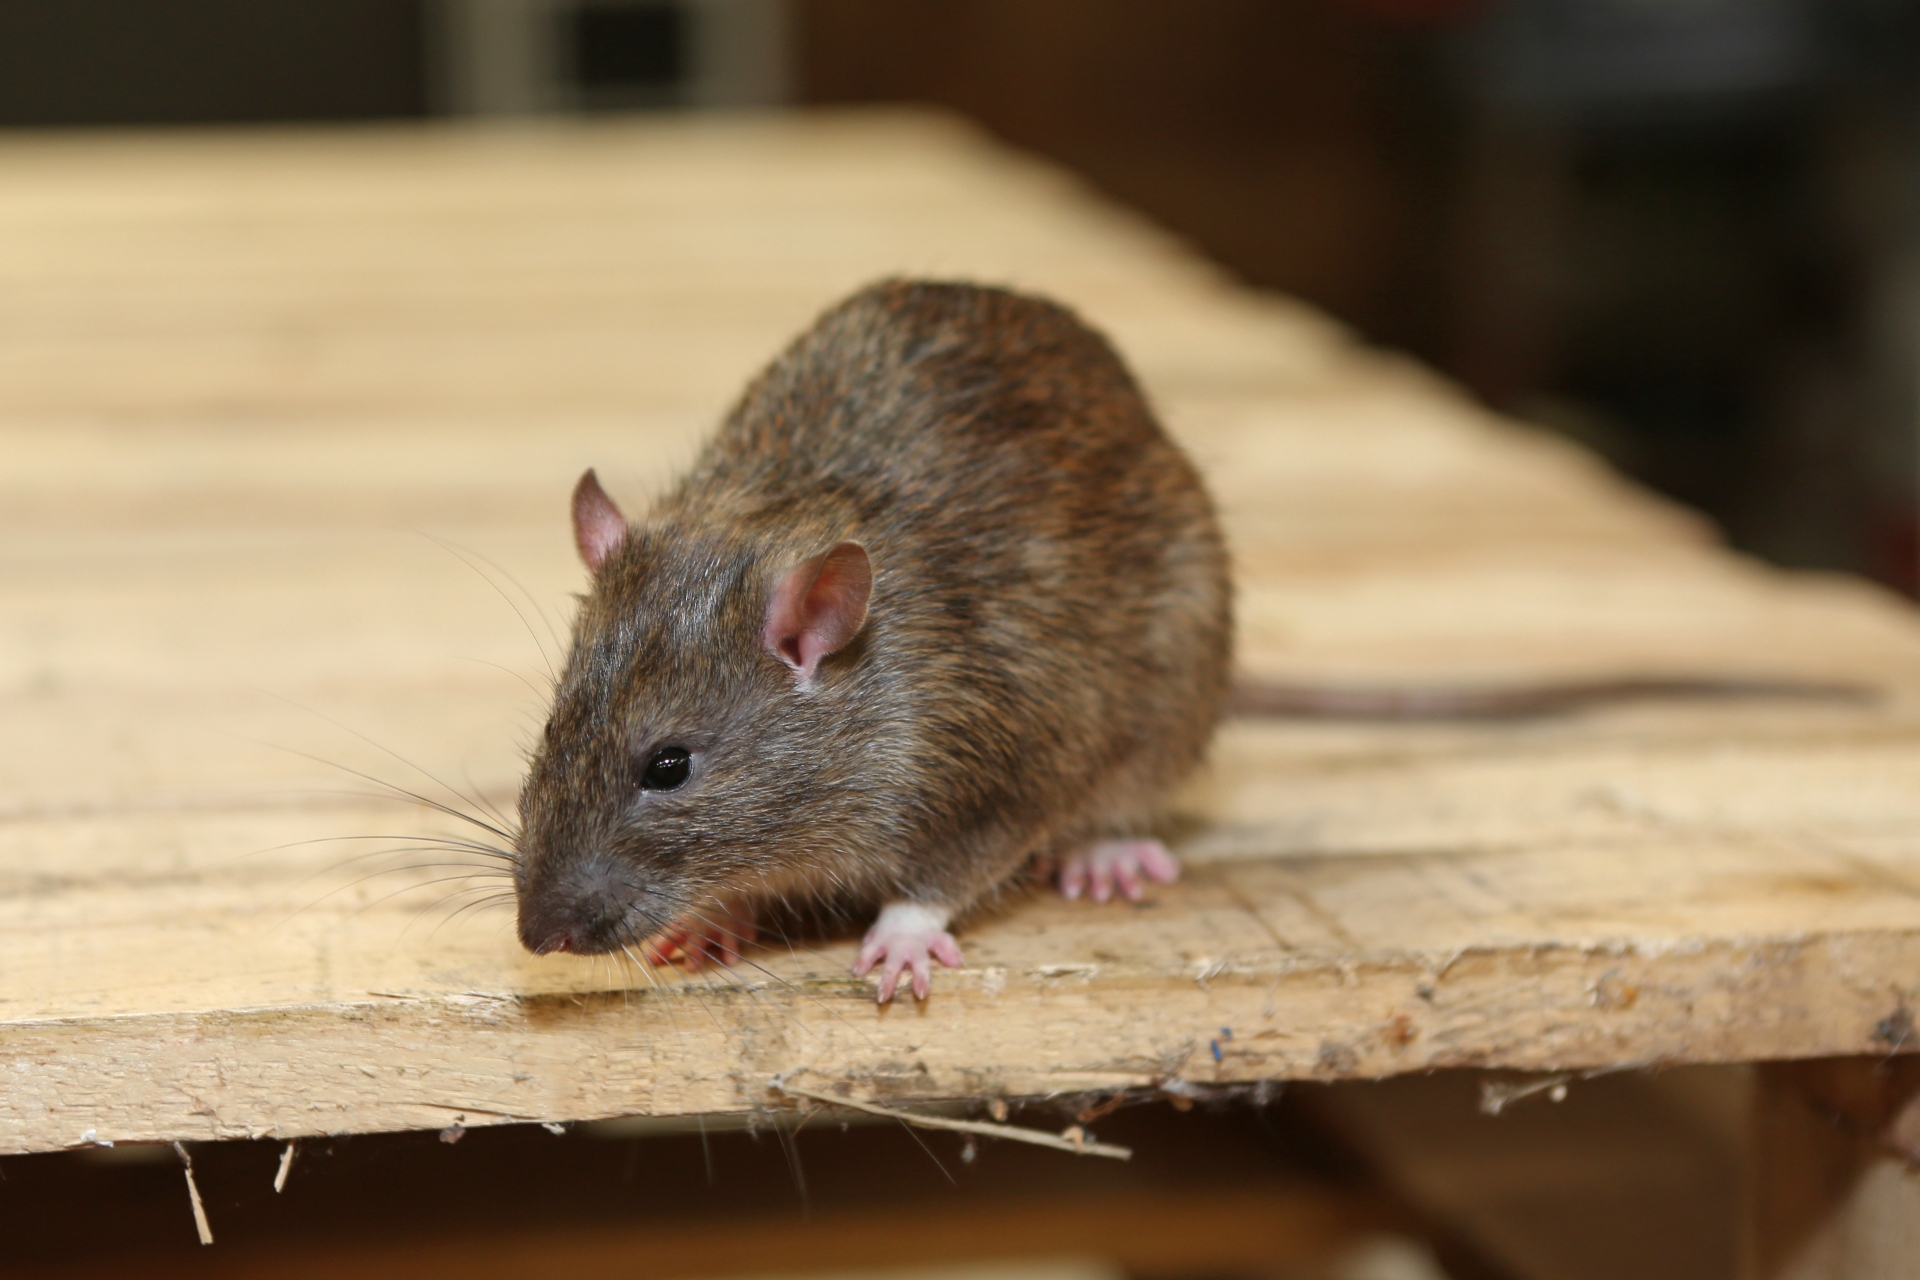 Rat Control, Pest Control in Plumstead, SE18. Call Now 020 8166 9746